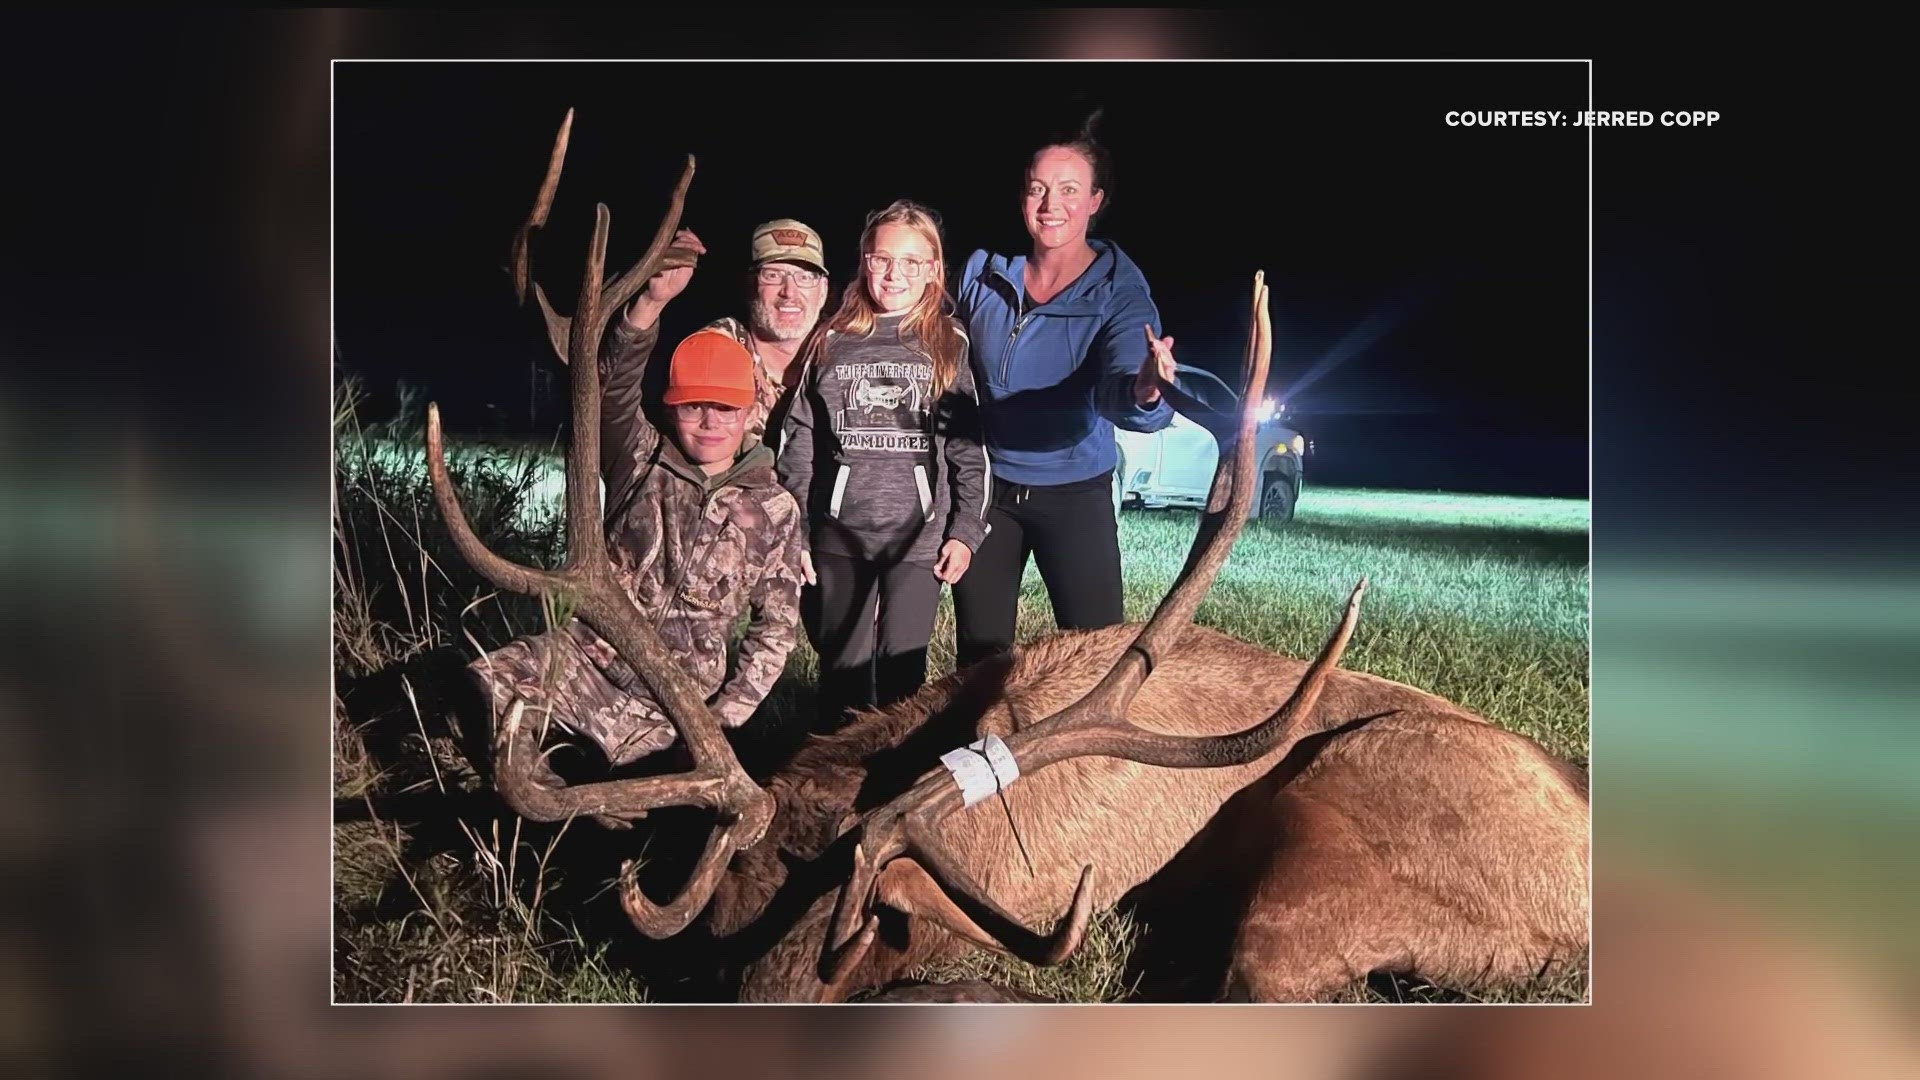 His dad says hockey comes first for 13-year-old Ryker Copp, but hunting is a close second. That may change after the teen from Warren, MN bagged a huge elk Sunday.